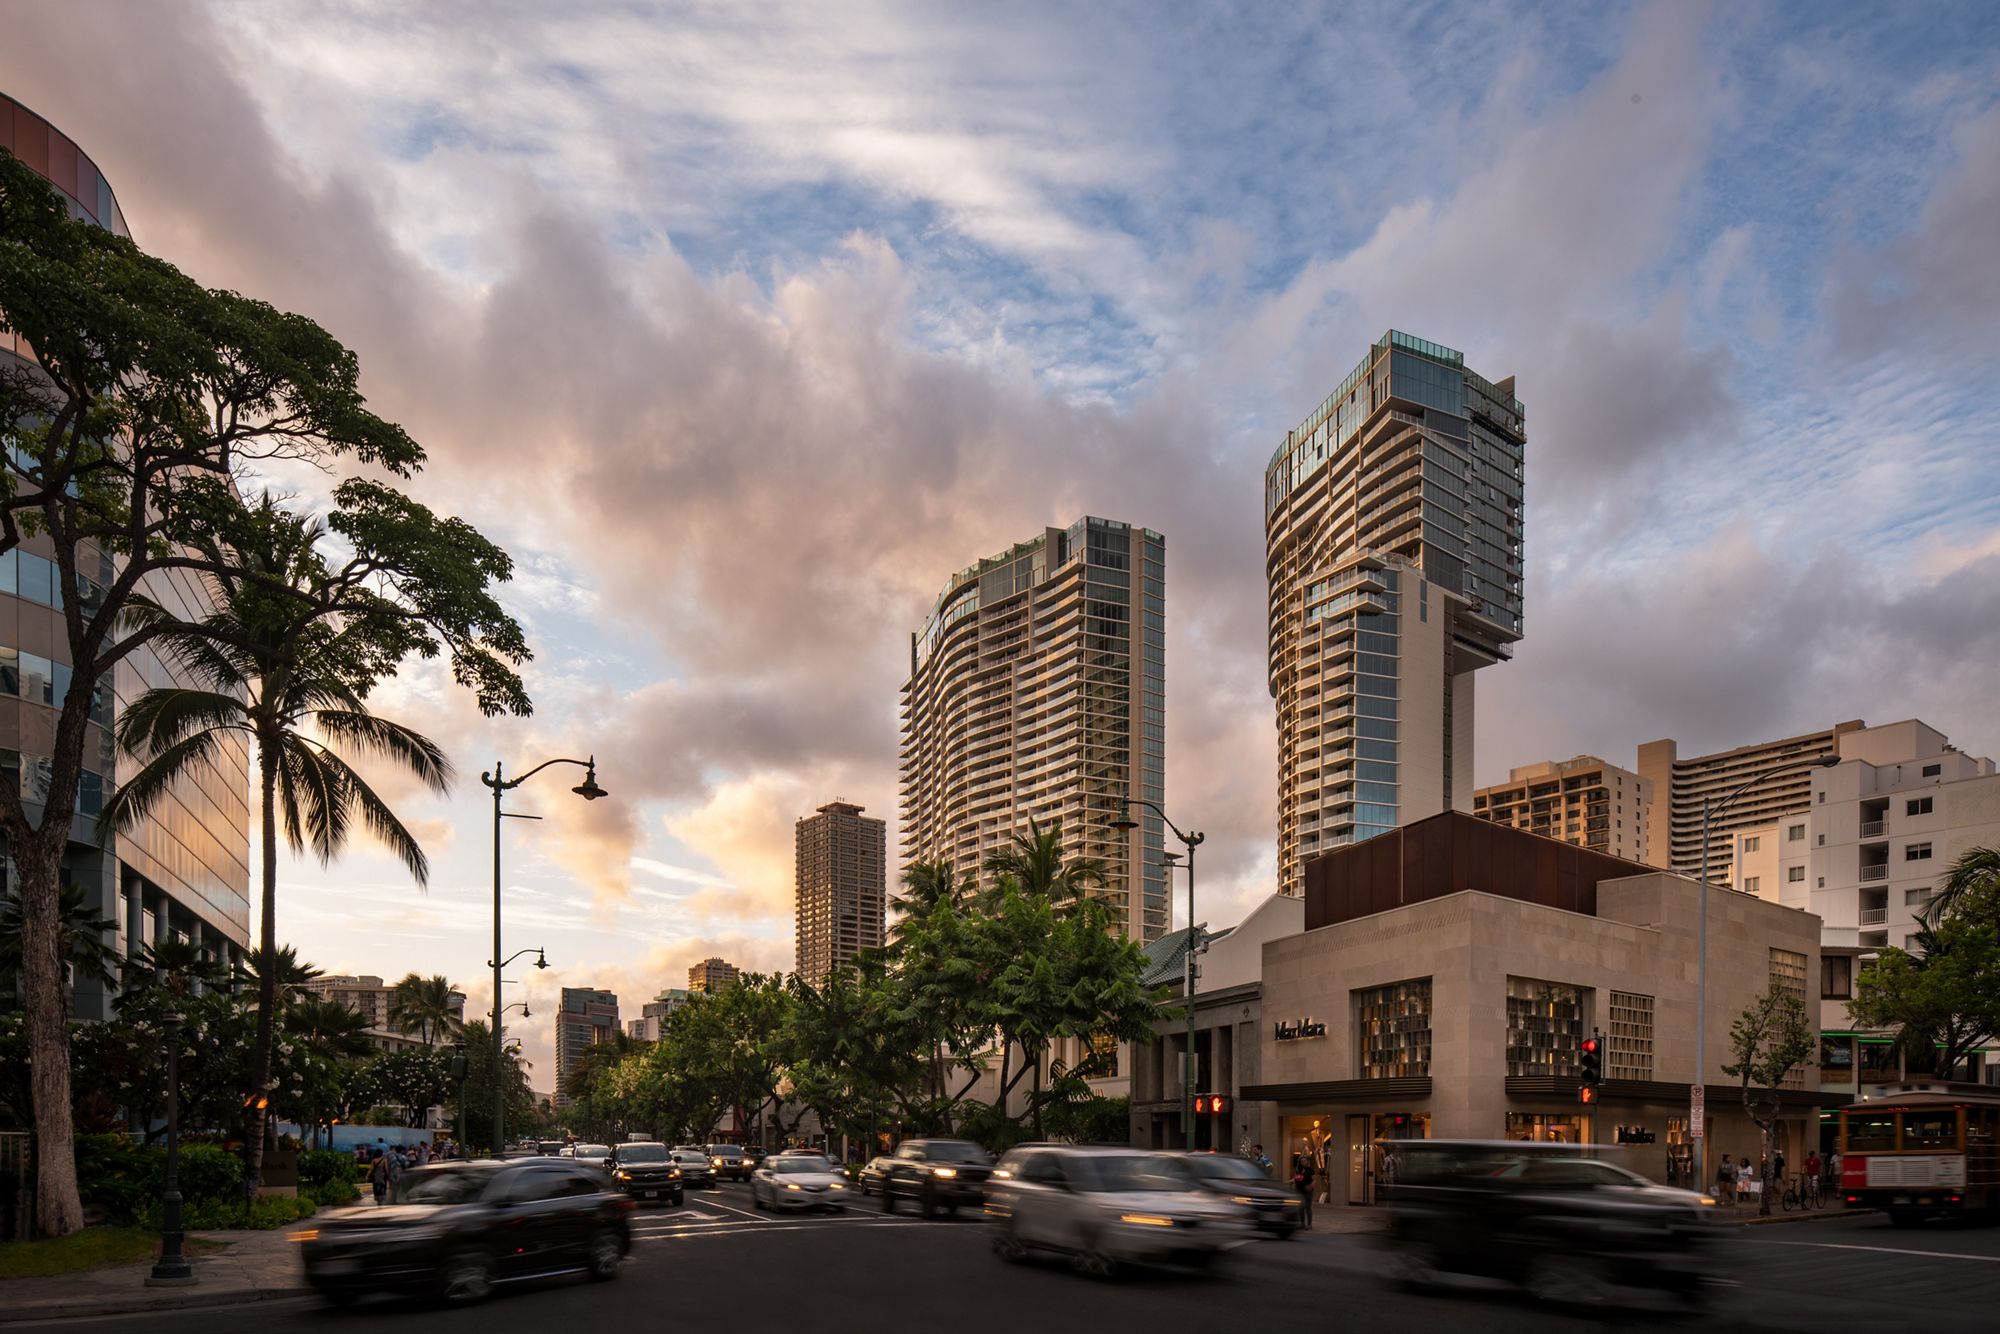 The resorts new 245-residence Diamond Head Tower is positioned alongside the existing 307-residence Ewa Tower